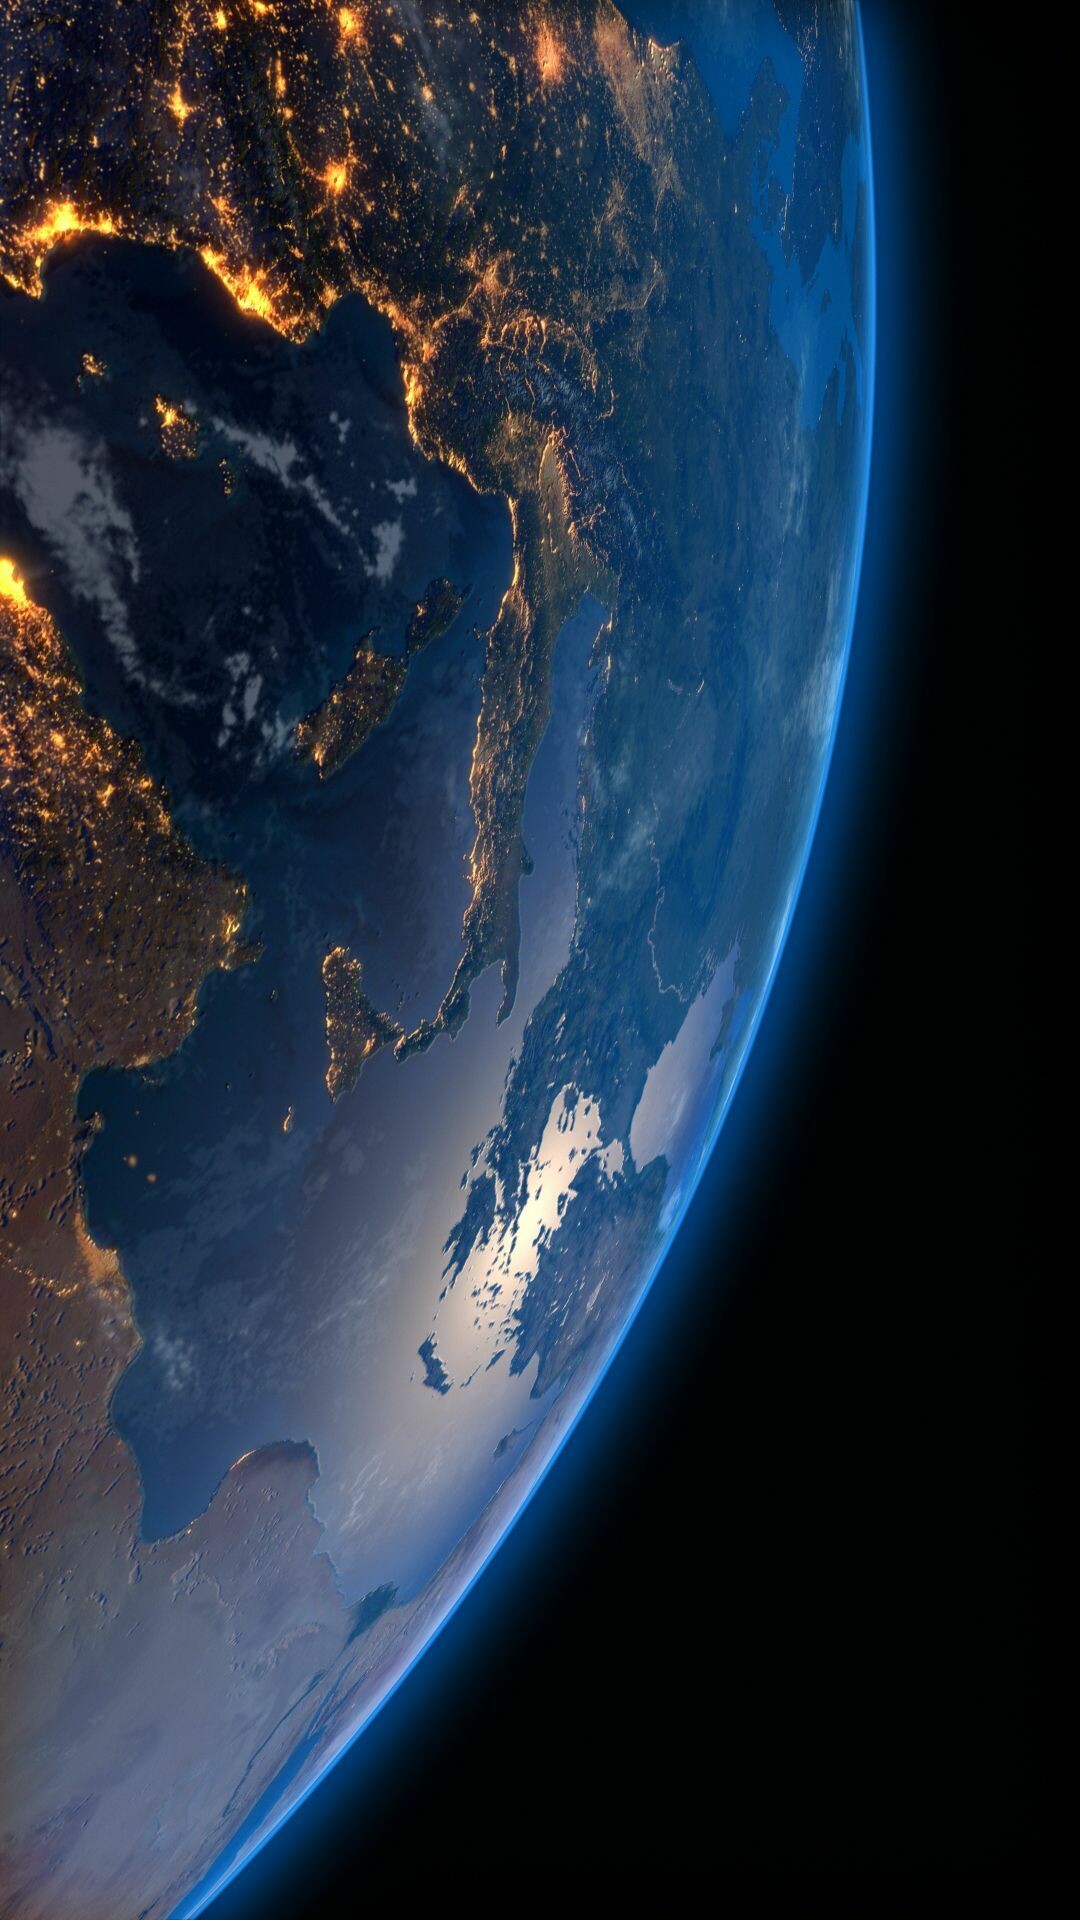 Earth: Space, The fifth-largest planet in the solar system in terms of size and mass. 1080x1920 Full HD Wallpaper.